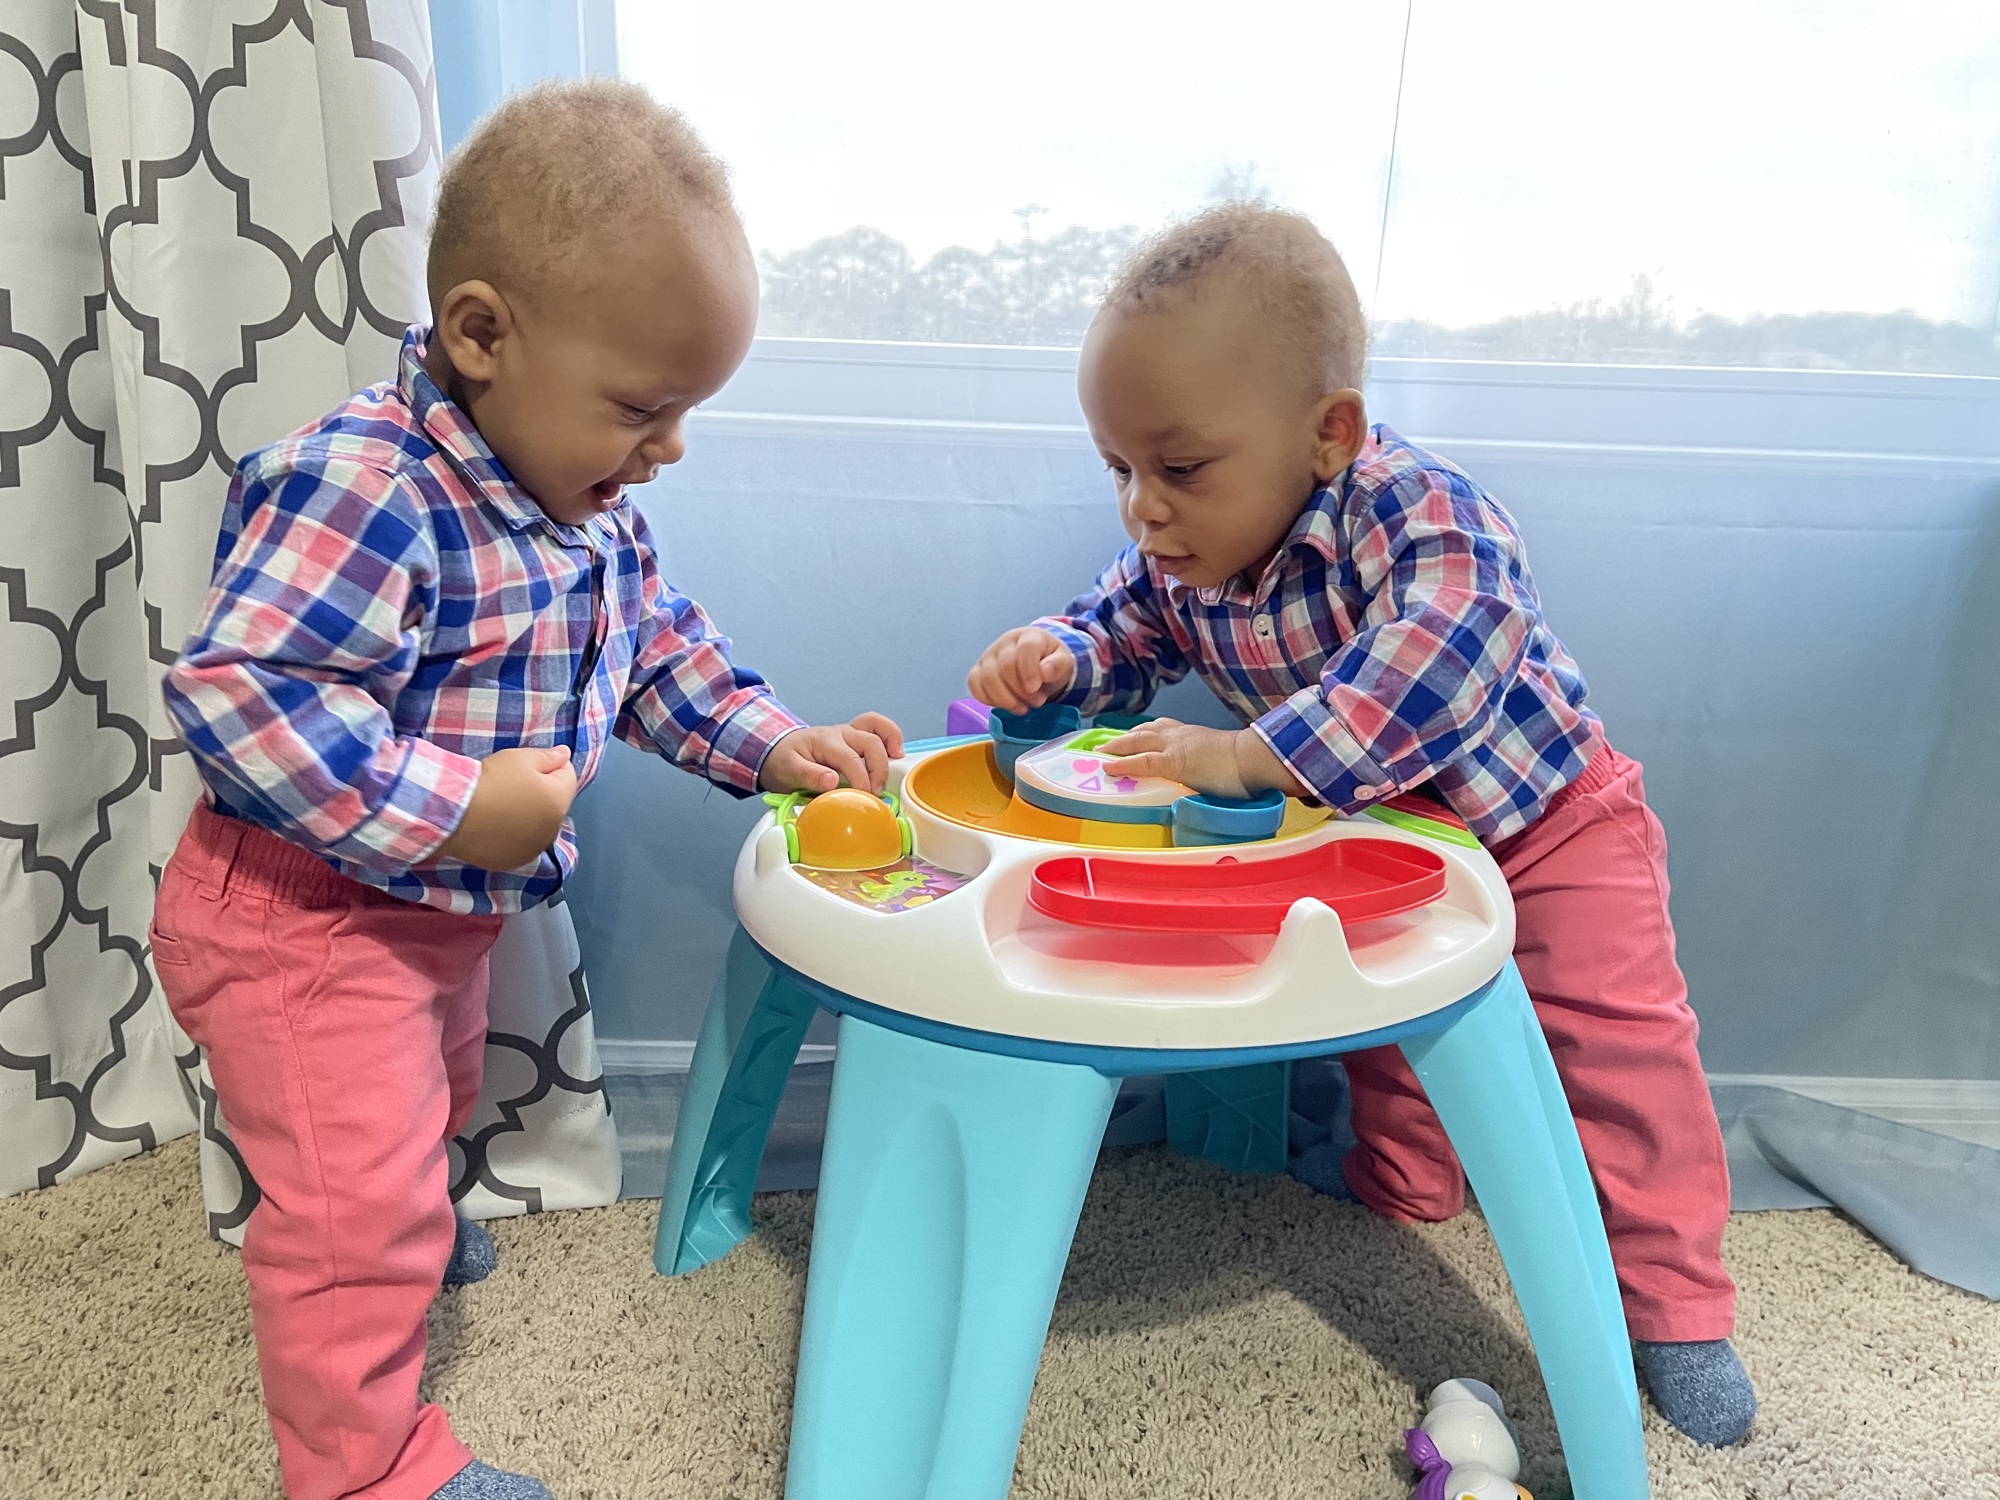 Jamari and Jameir, sons of Novlene Hilaire Williams-Mills and Jameel Mills, at 10 months old. The boys are now 1.